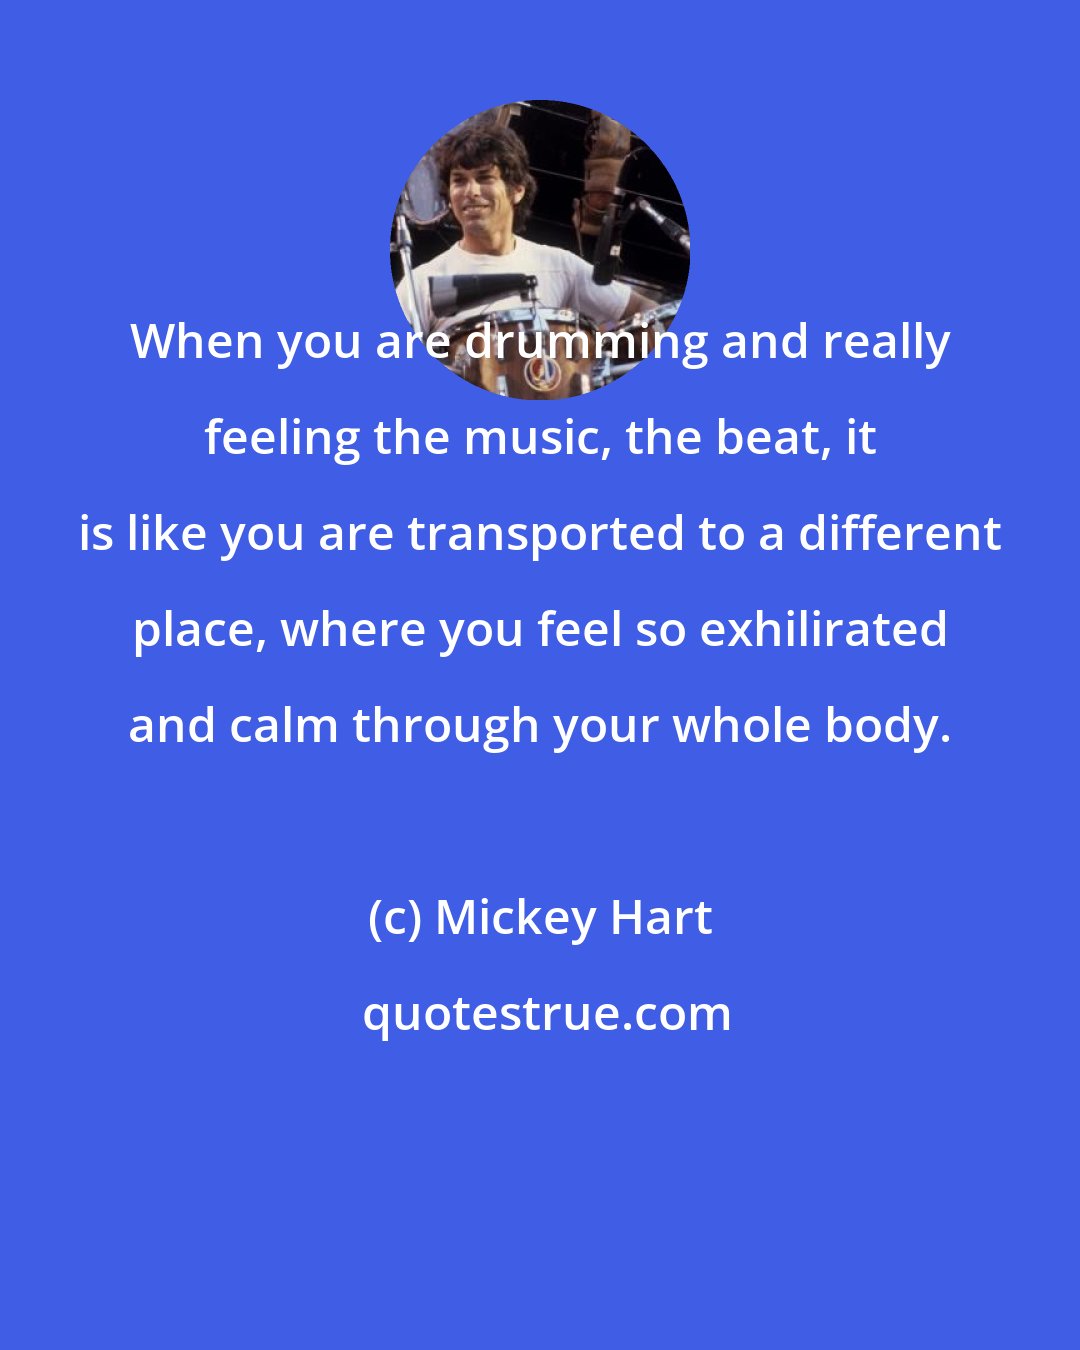 Mickey Hart: When you are drumming and really feeling the music, the beat, it is like you are transported to a different place, where you feel so exhilirated and calm through your whole body.